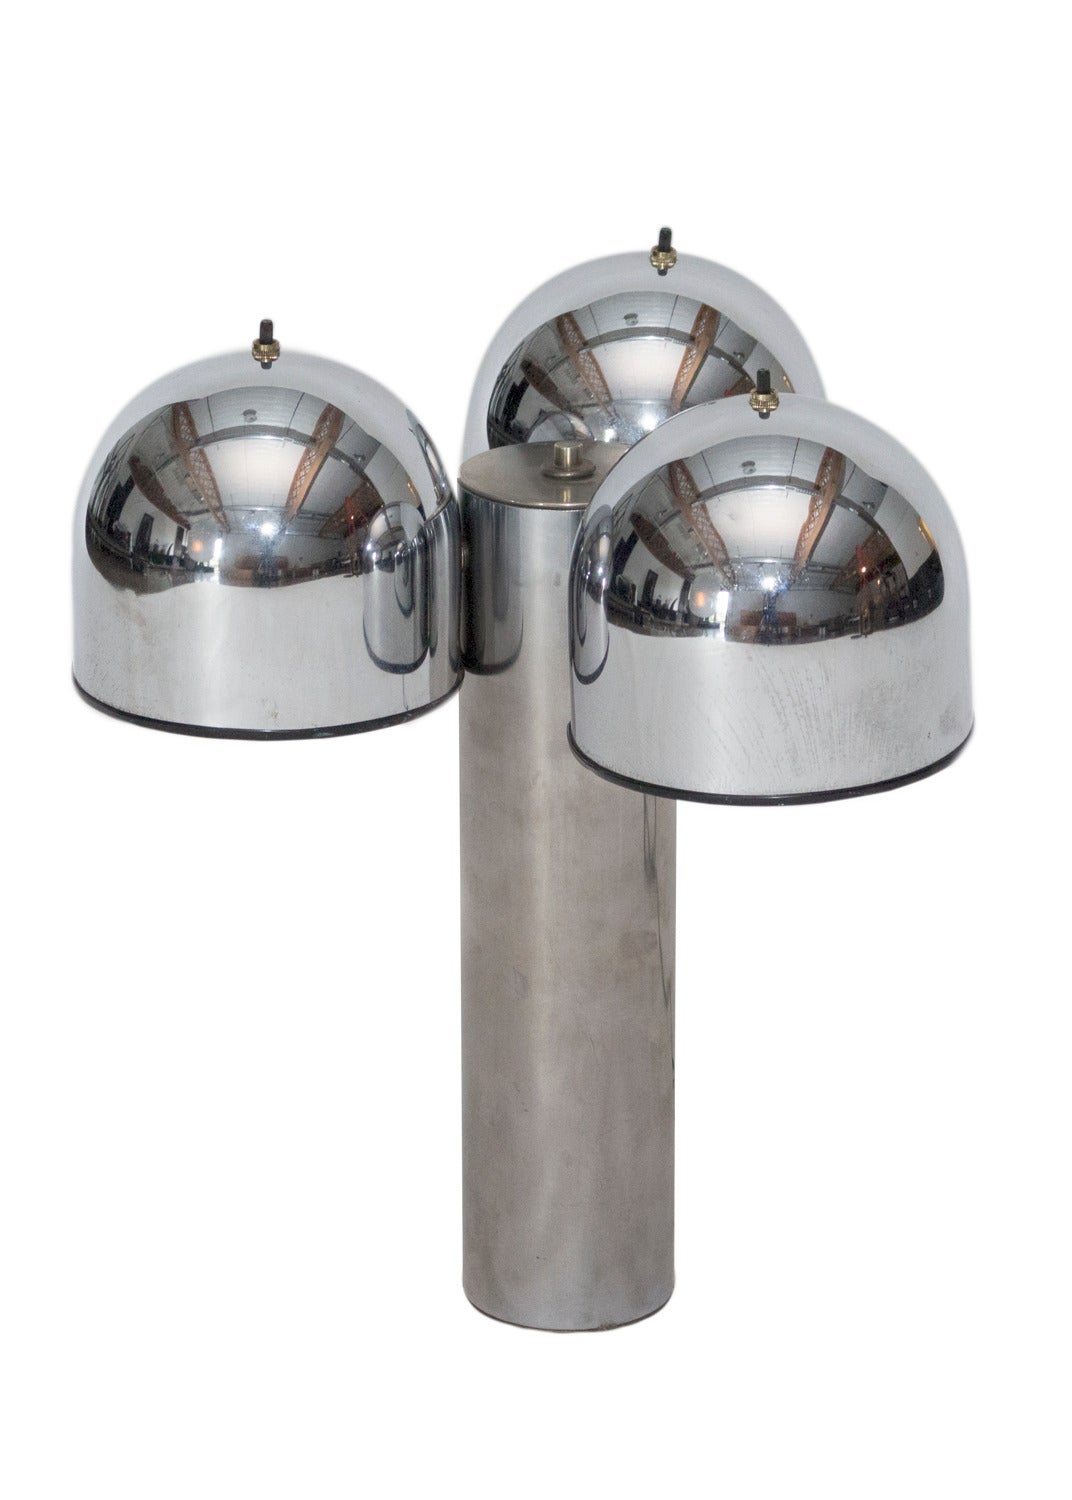 Chrome 1960s Italian table lamp with mirrored shades.